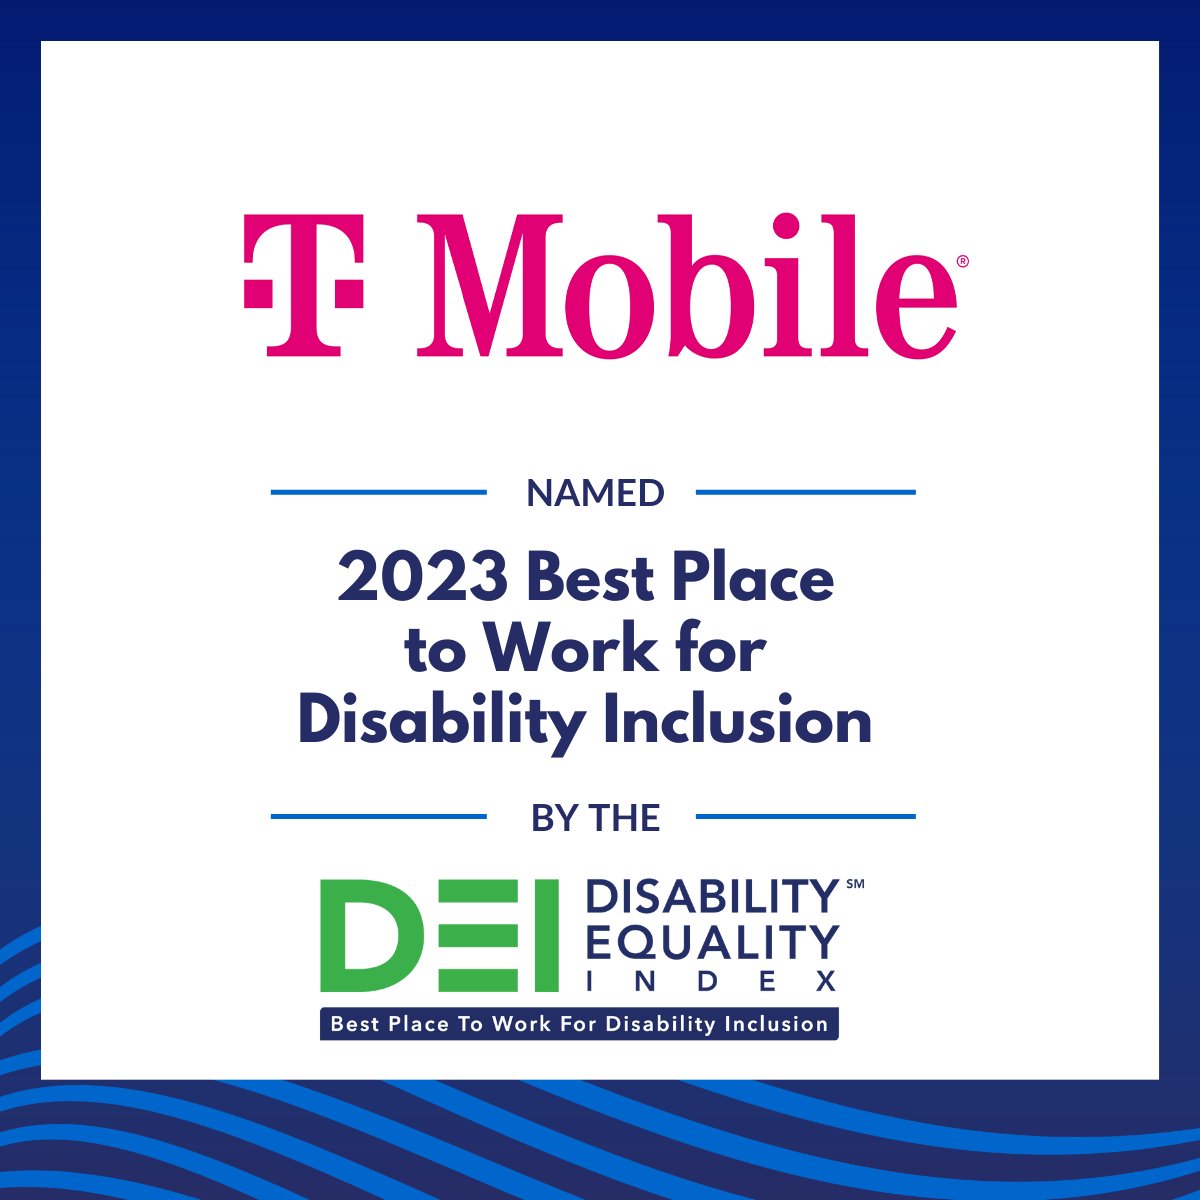 For the 7th year in a row, @TMobile earned a perfect 💯 score on the 2023 @disabilityin Index (DEI)! I love to see our teams earn recognition for creating a truly inclusive workplace for everyone.